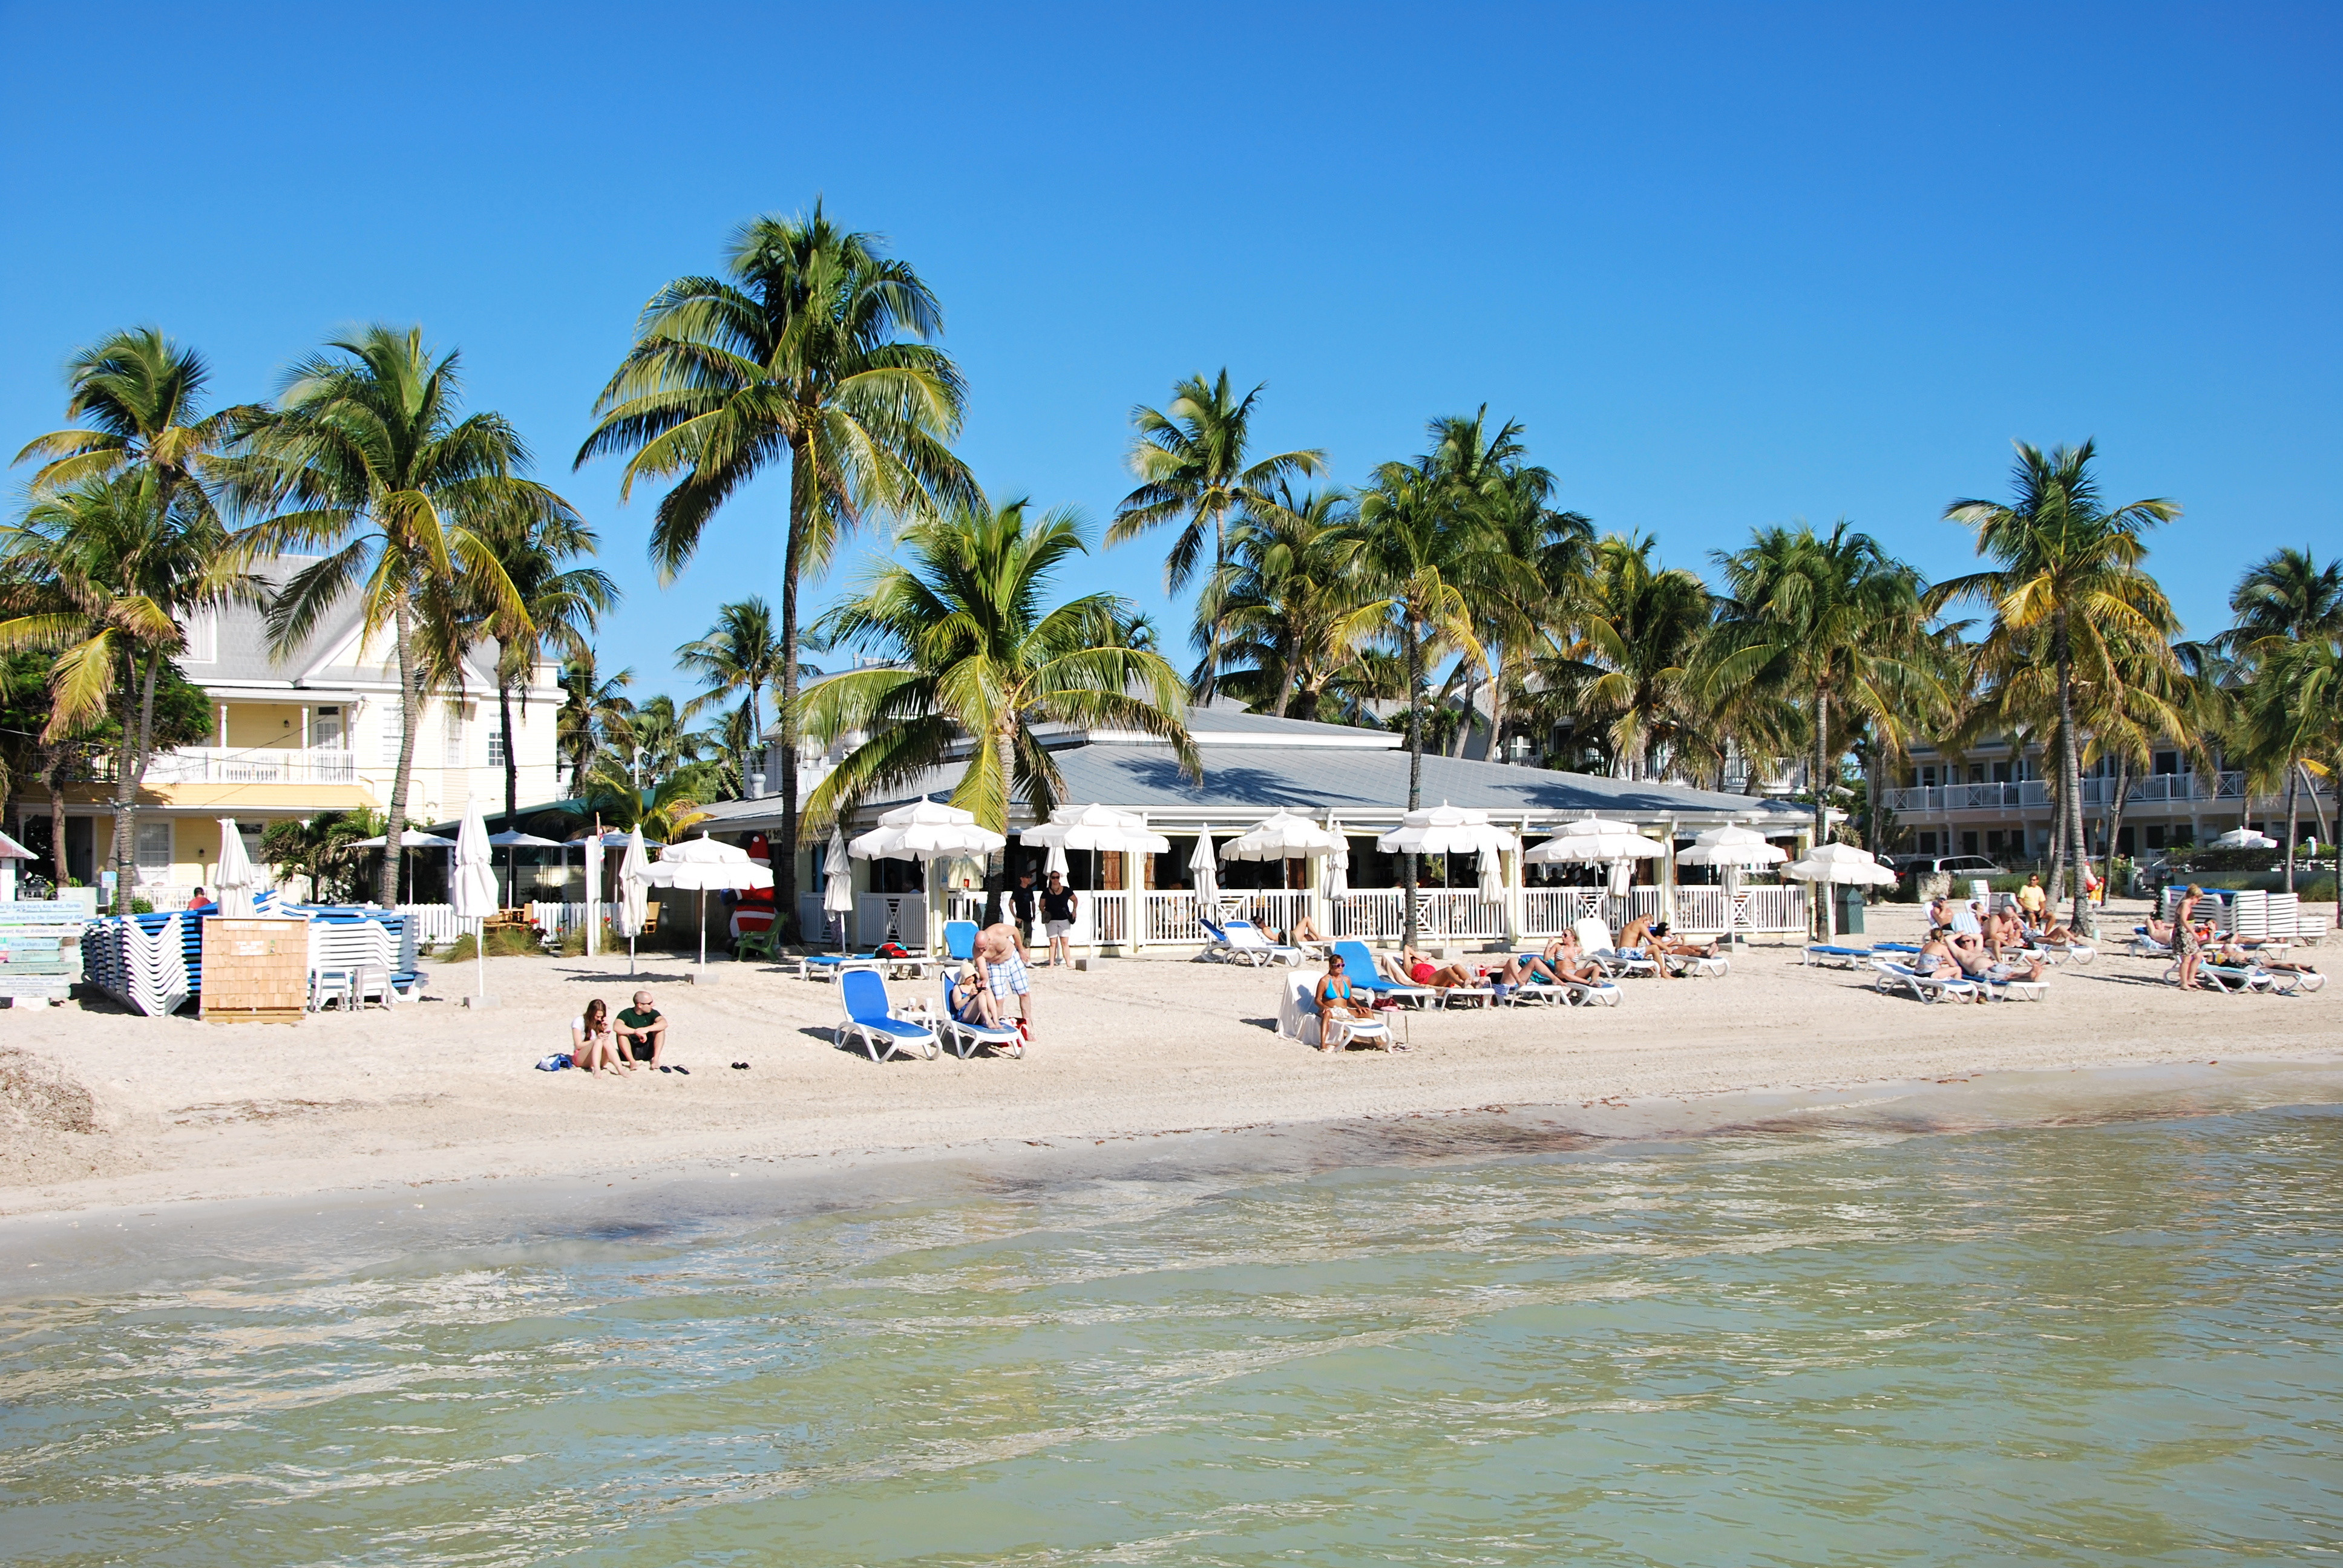 10 Best Beaches In Key West Florida (And Close By!)